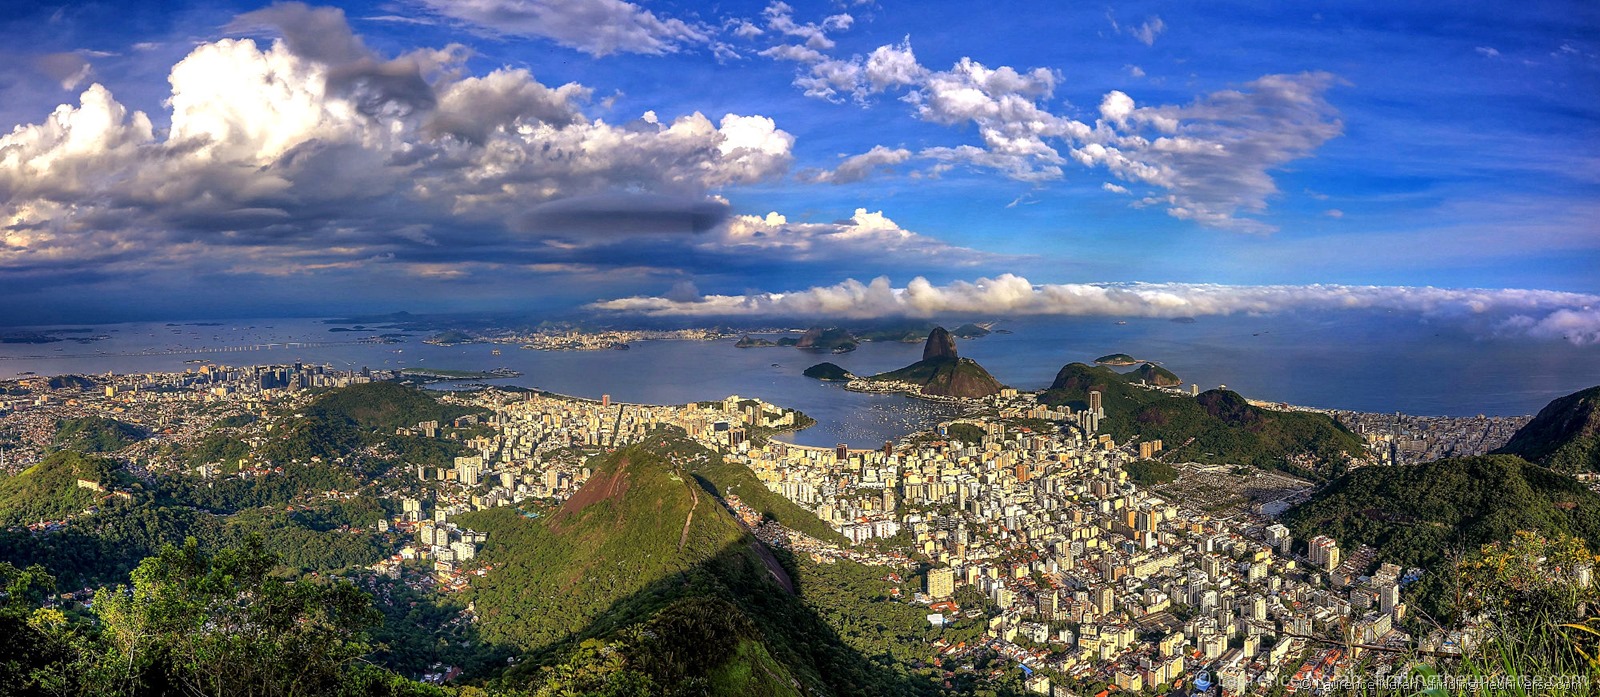 [Rio%2520from%2520above%2520panoramic%2520scaled%255B2%255D.jpg]